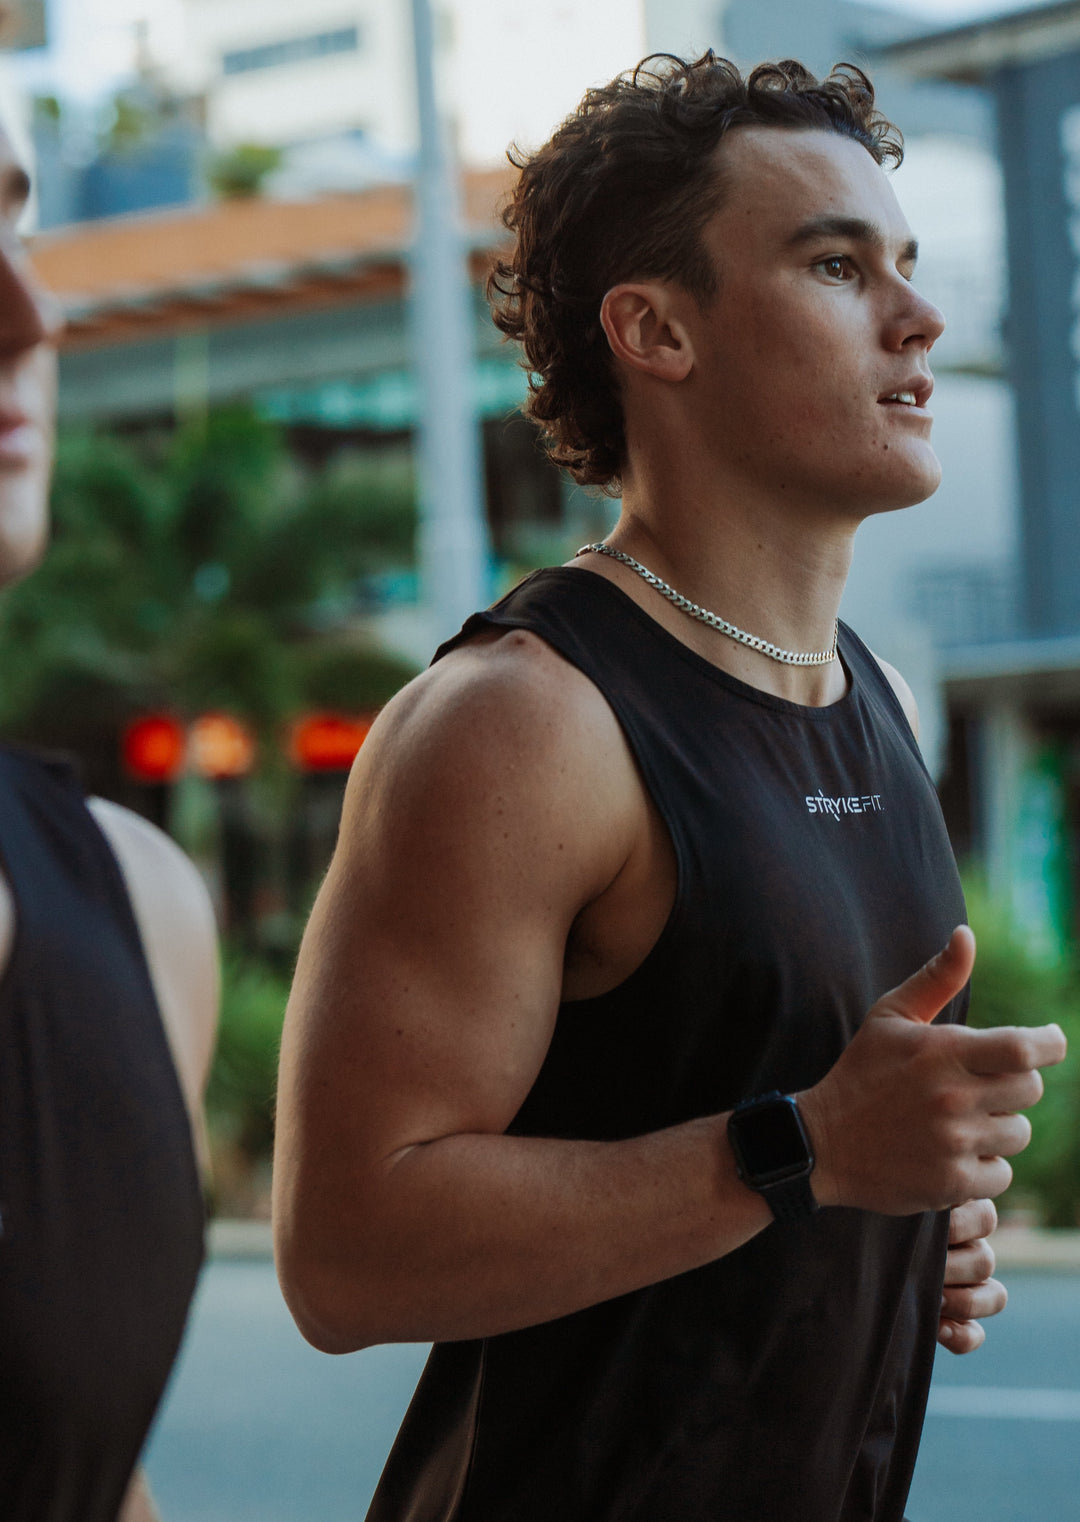 The STRIDE SINGLET is lightweight and moisture-wicking, allowing you to perform at your highest potential. The style has wider shoulders for extra comfort.